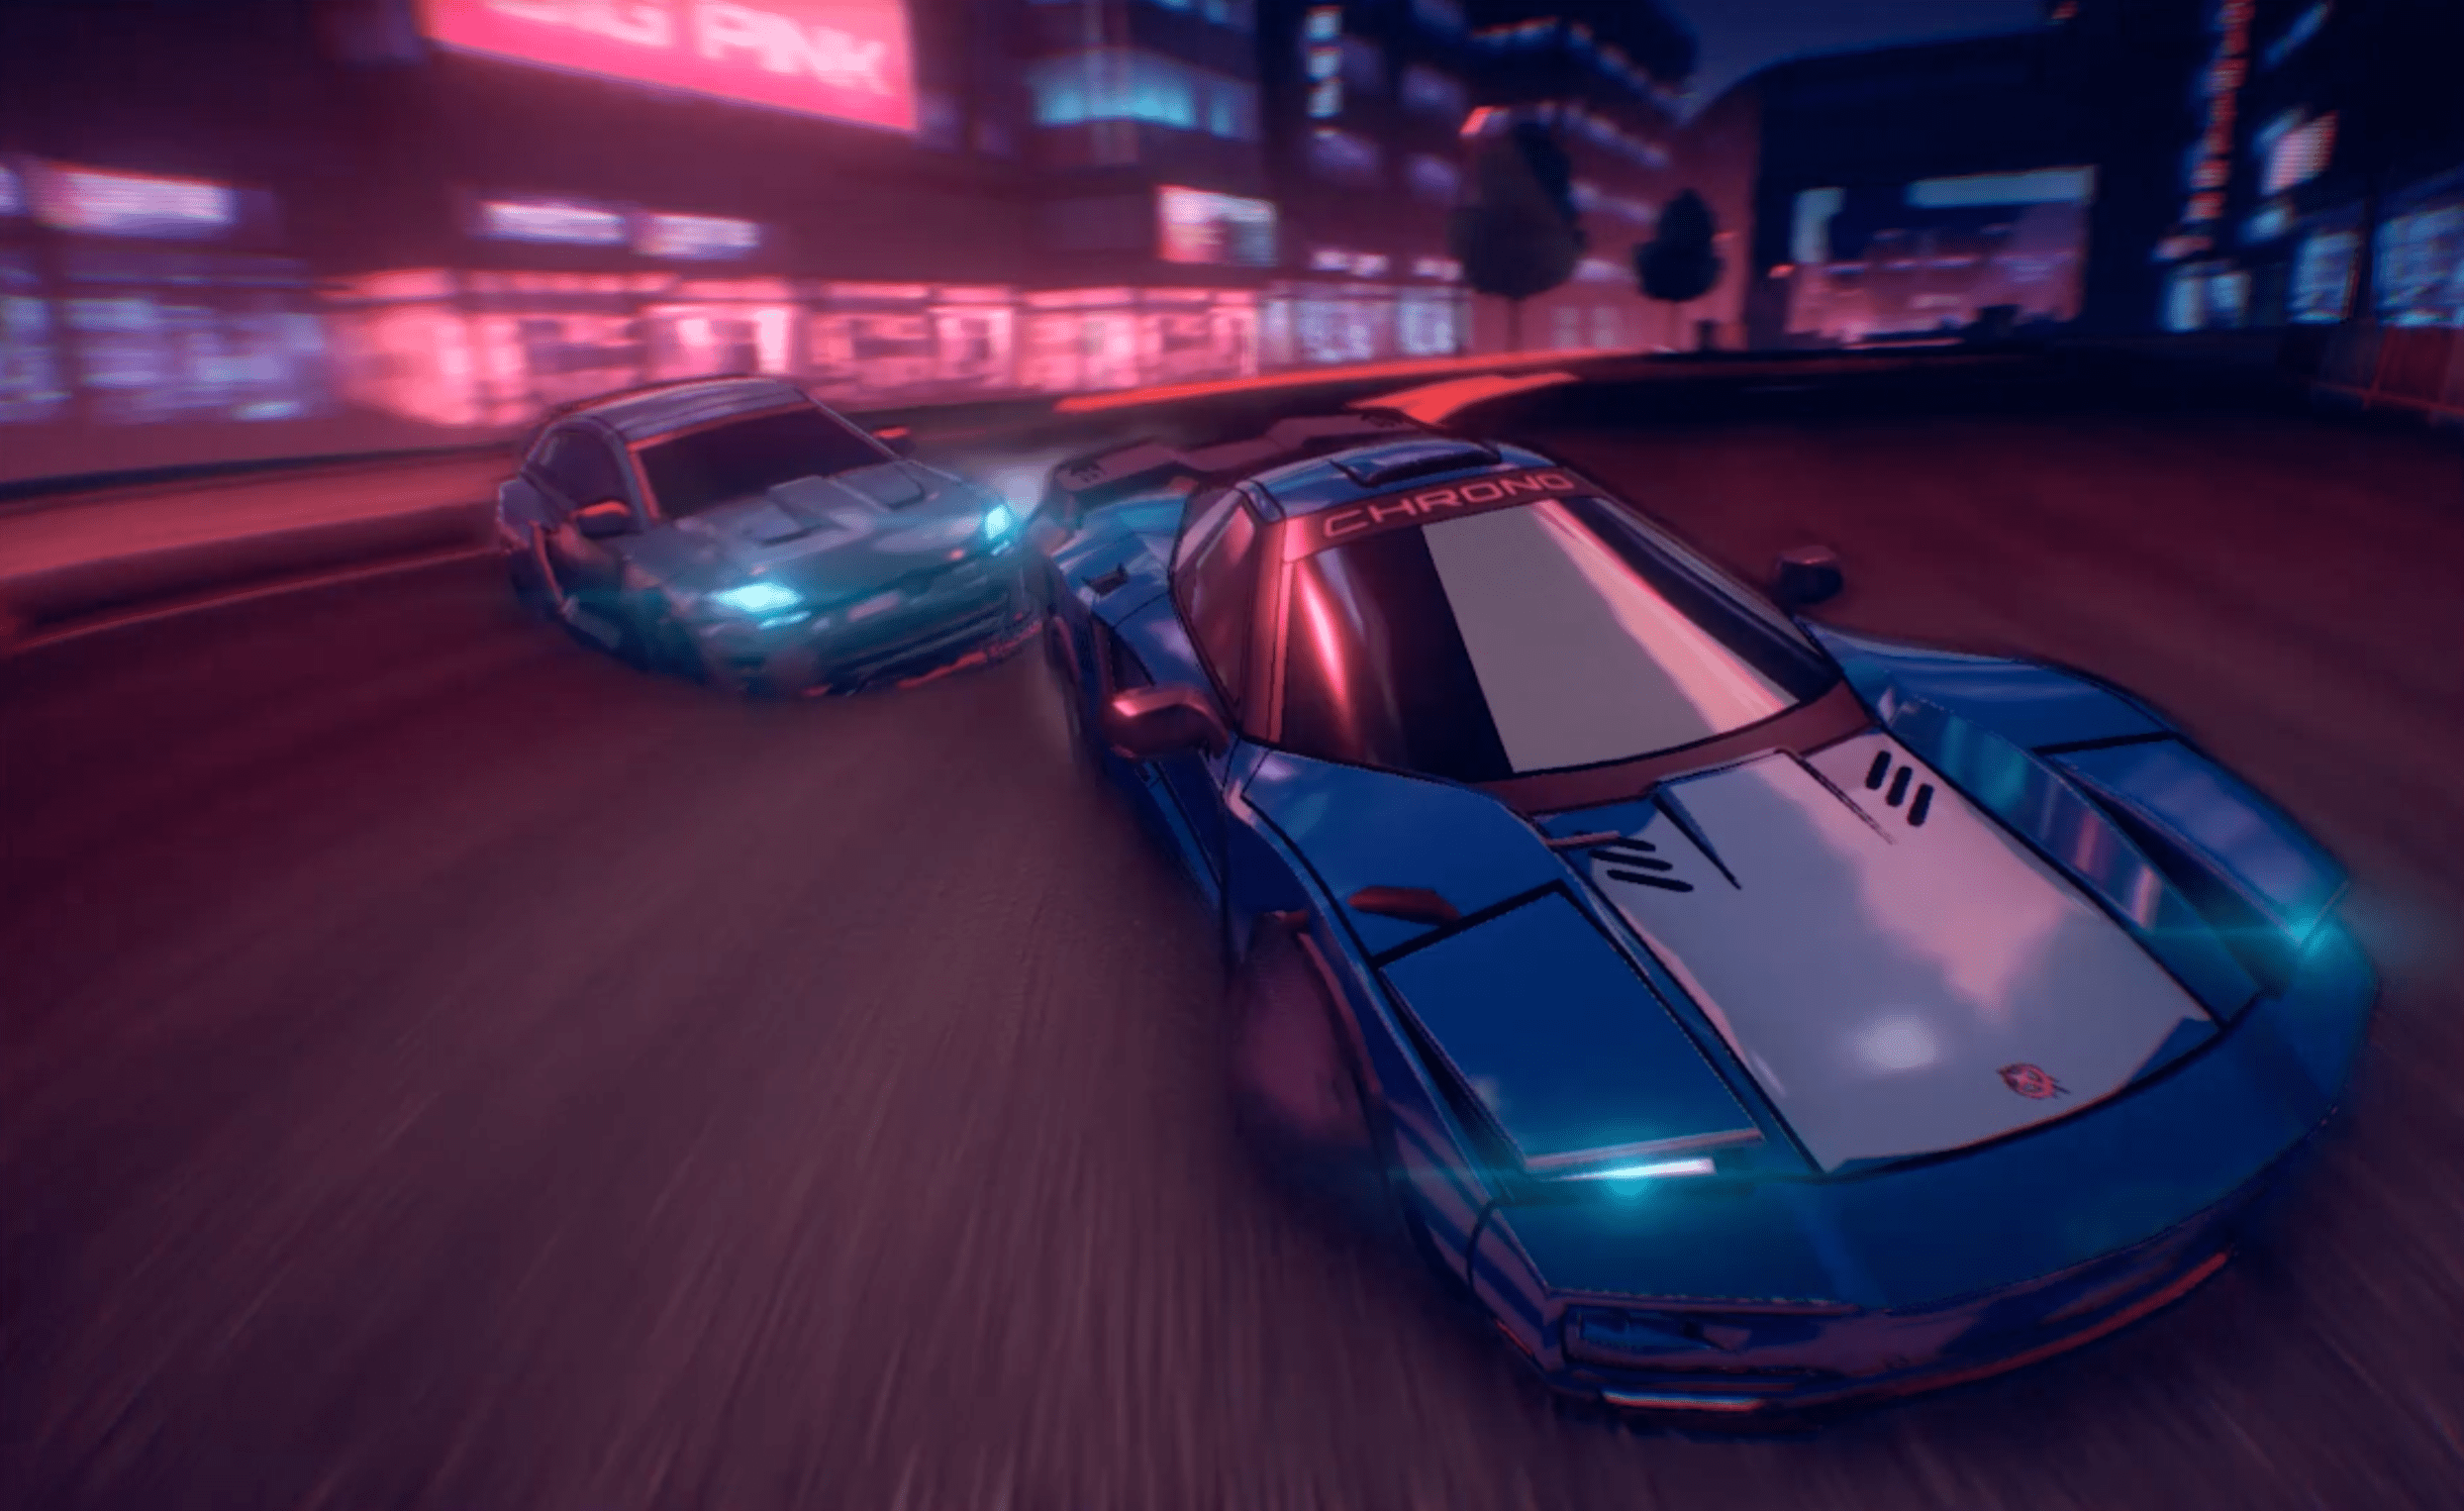 Inertial Drift: Twilight Rivals Edition coming to PlayStation 5 and Xbox Series X